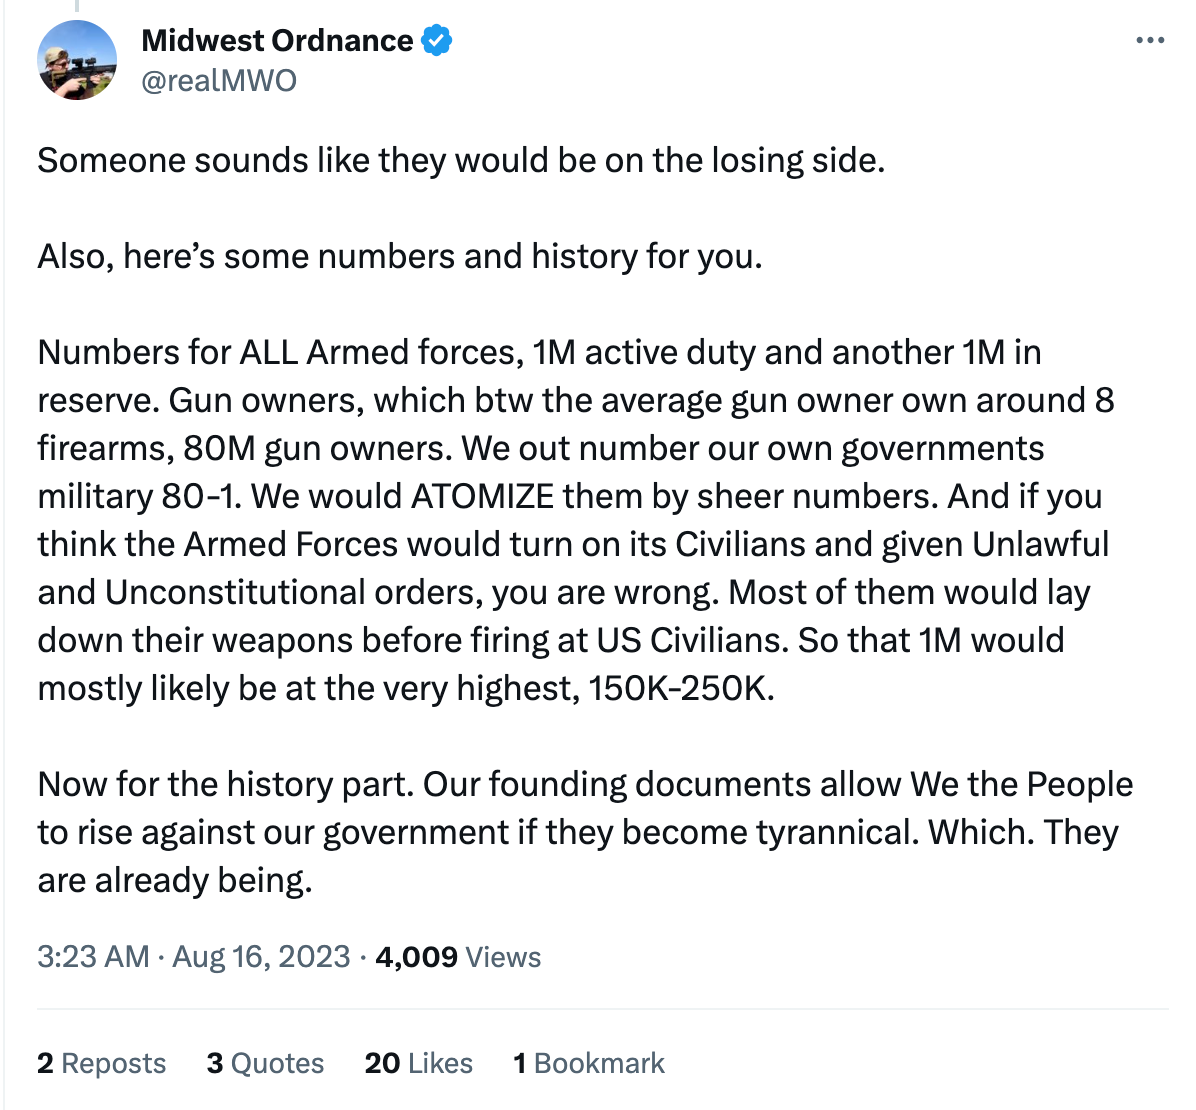 Tweet from this loser: "Someone sounds like they would be on the losing side.   Also, here’s some numbers and history for you.   Numbers for ALL Armed forces, 1M active duty and another 1M in reserve. Gun owners, which btw the average gun owner own around 8 firearms, 80M gun owners. We out number our own governments military 80-1. We would ATOMIZE them by sheer numbers. And if you think the Armed Forces would turn on its Civilians and given Unlawful and Unconstitutional orders, you are wrong. Most of them would lay down their weapons before firing at US Civilians. So that 1M would mostly likely be at the very highest, 150K-250K.   Now for the history part. Our founding documents allow We the People to rise against our government if they become tyrannical. Which. They are already being."